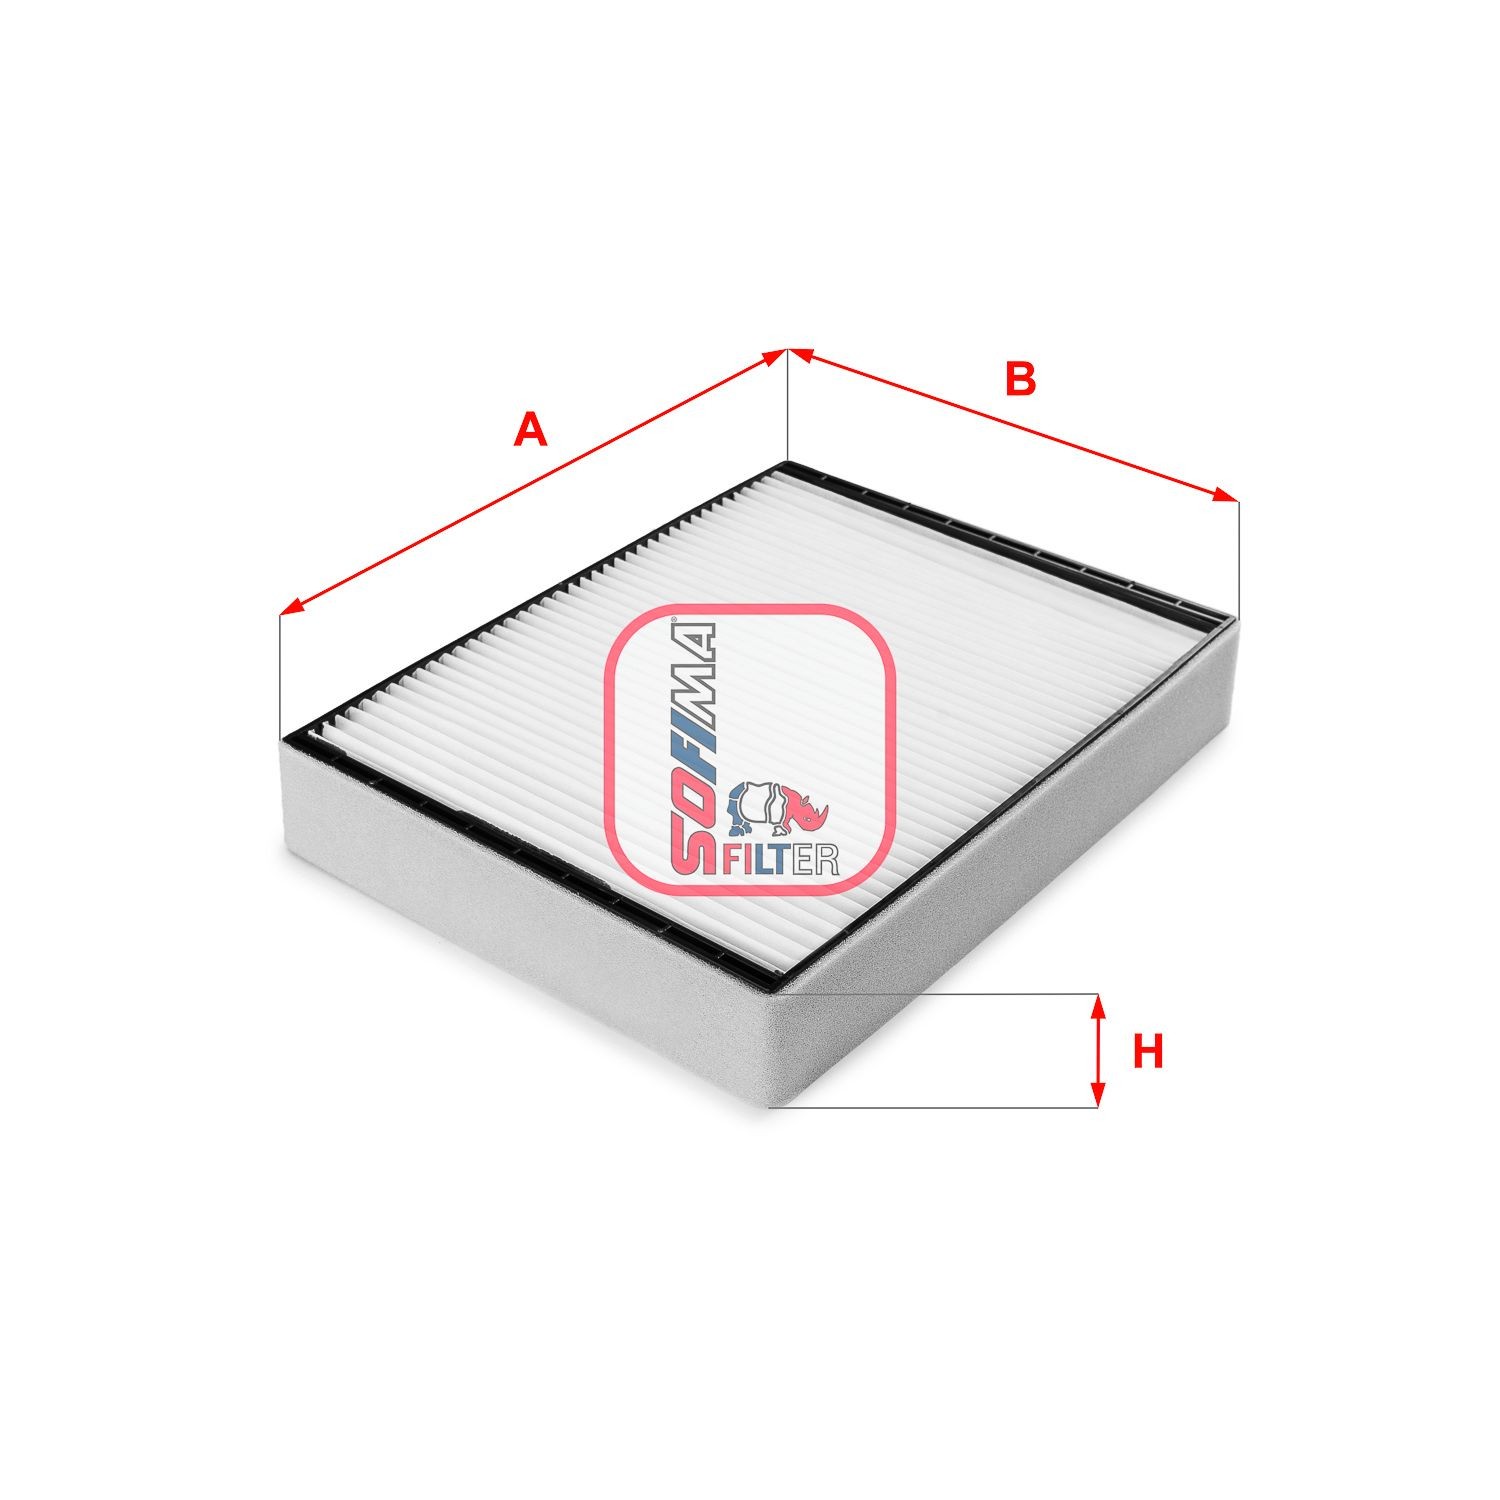 SOFIMA Particulate Filter, 262 mm x 197 mm x 38 mm Width: 197mm, Height: 38mm, Length: 262mm Cabin filter S 3077 C buy